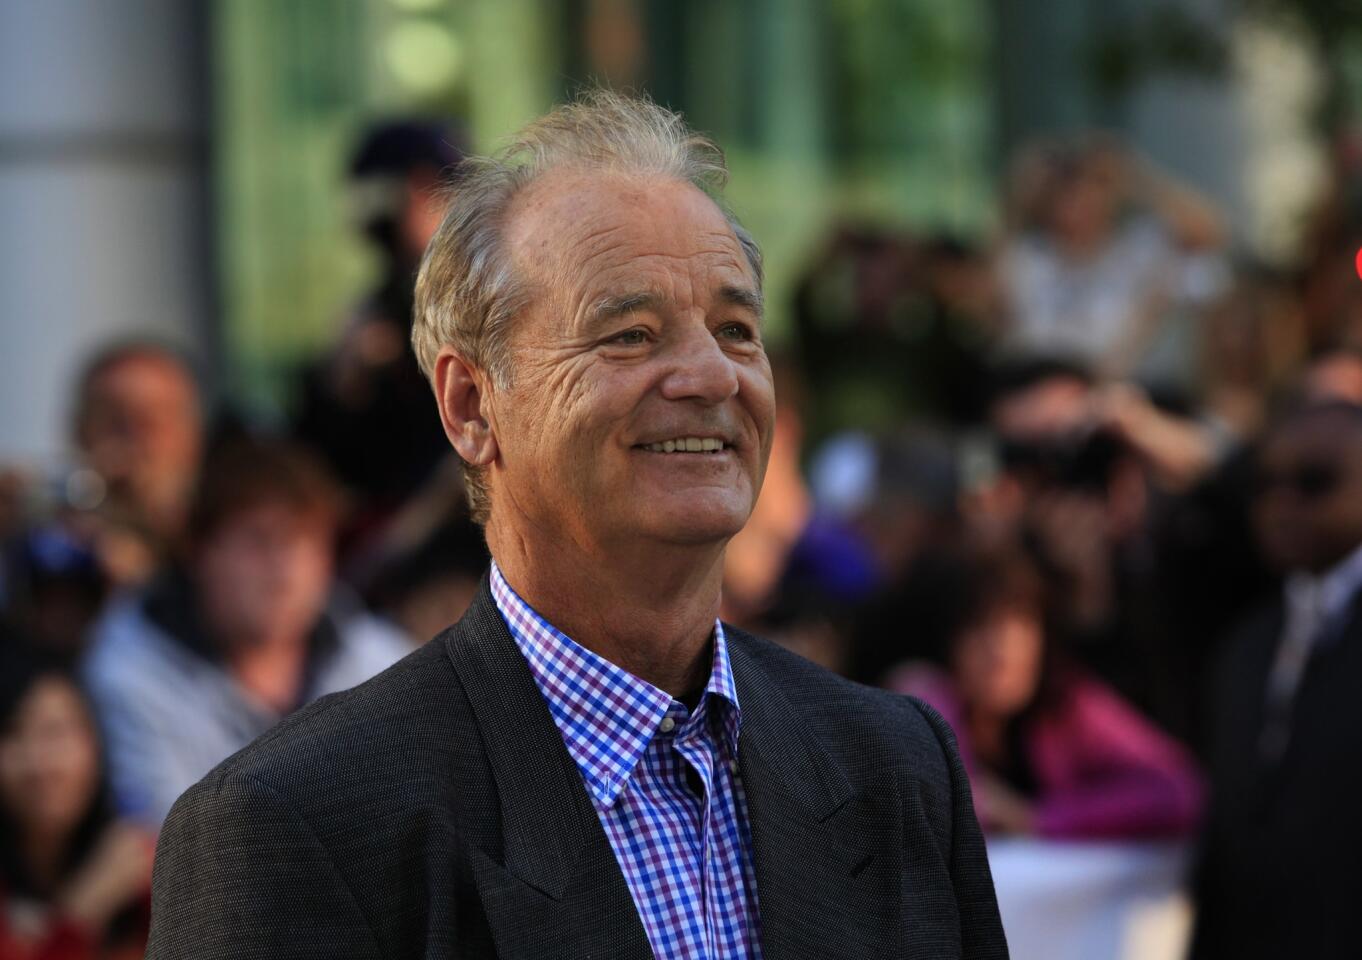 Bill Murray charms at bachelor party